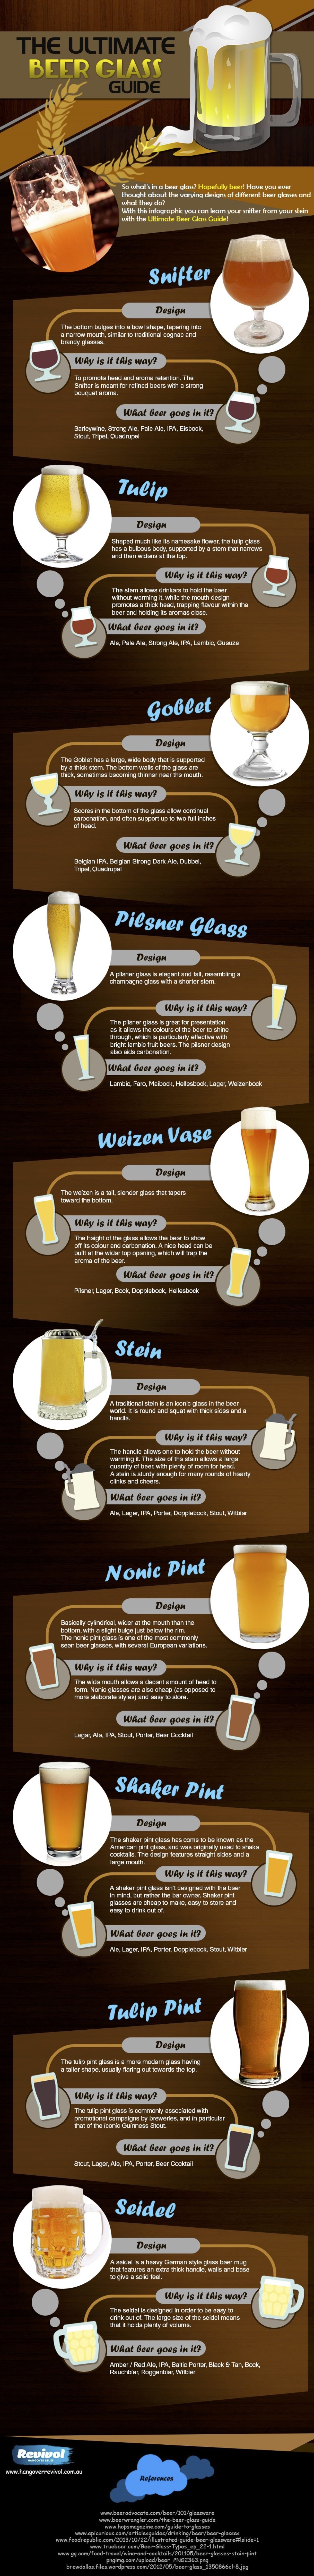 hangover-beer-glass-infographic